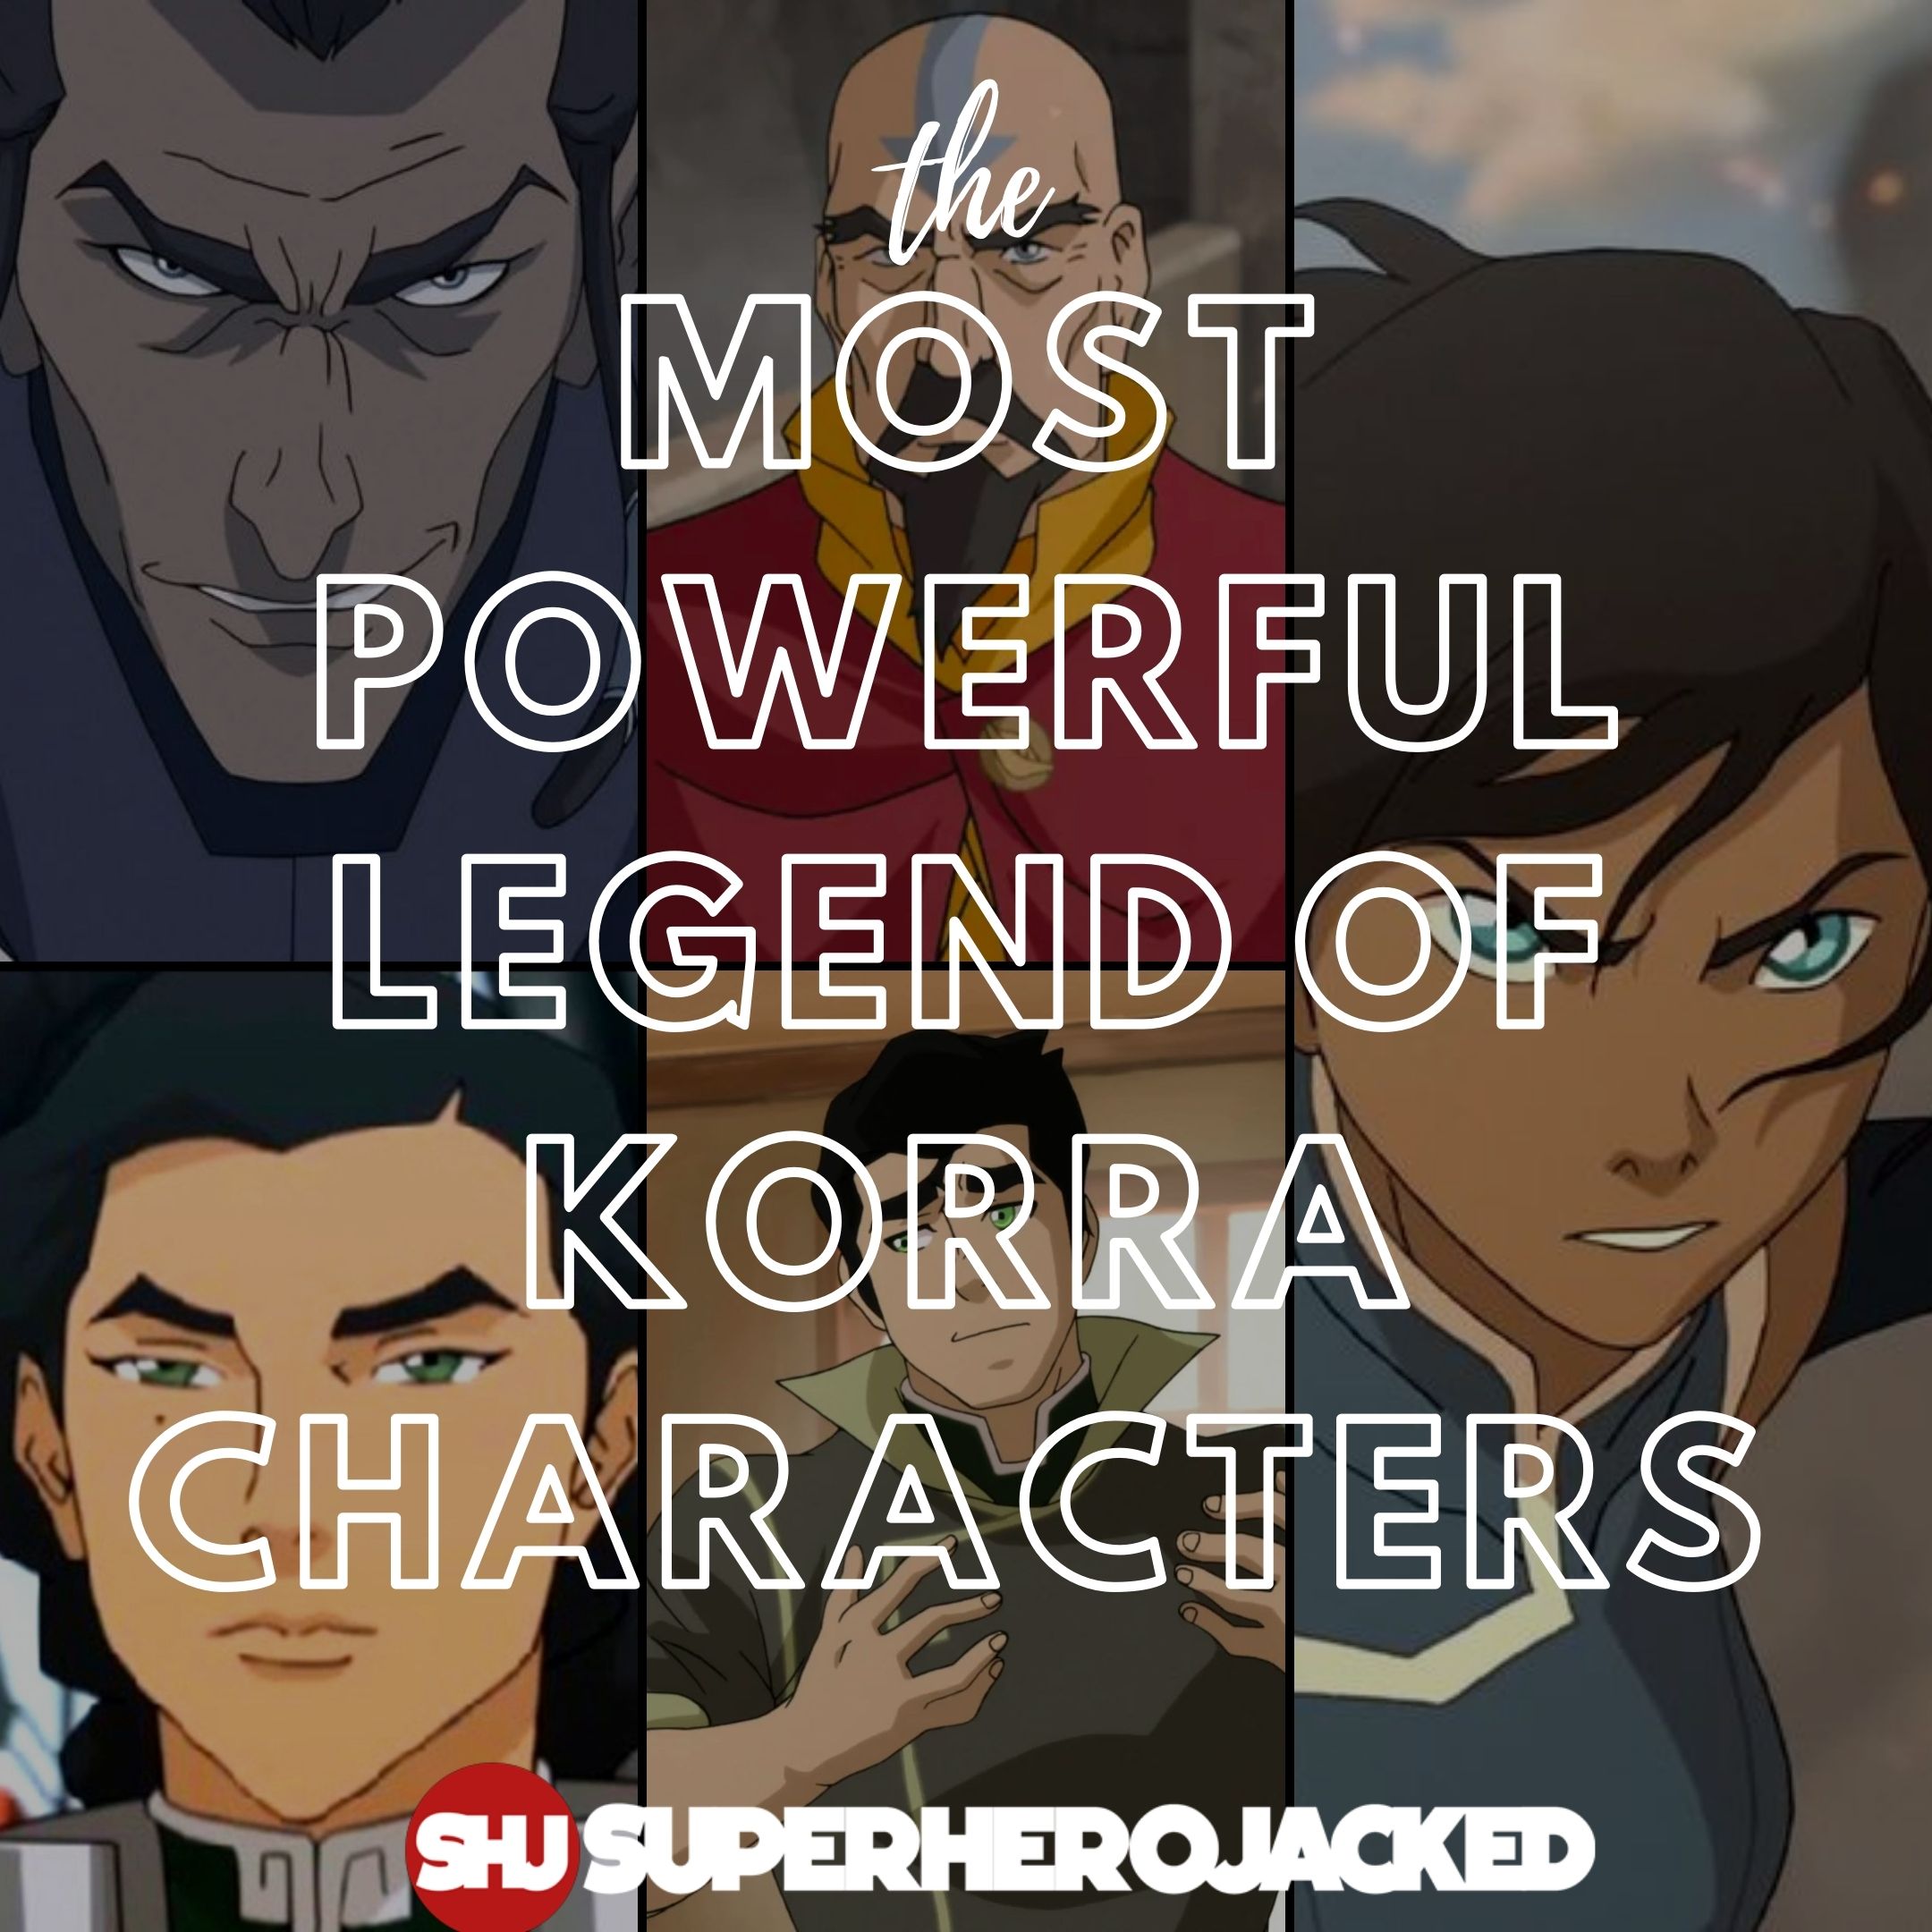 9 Avatar The Last Airbender Characters Who Also Appear in Legend of  Korra